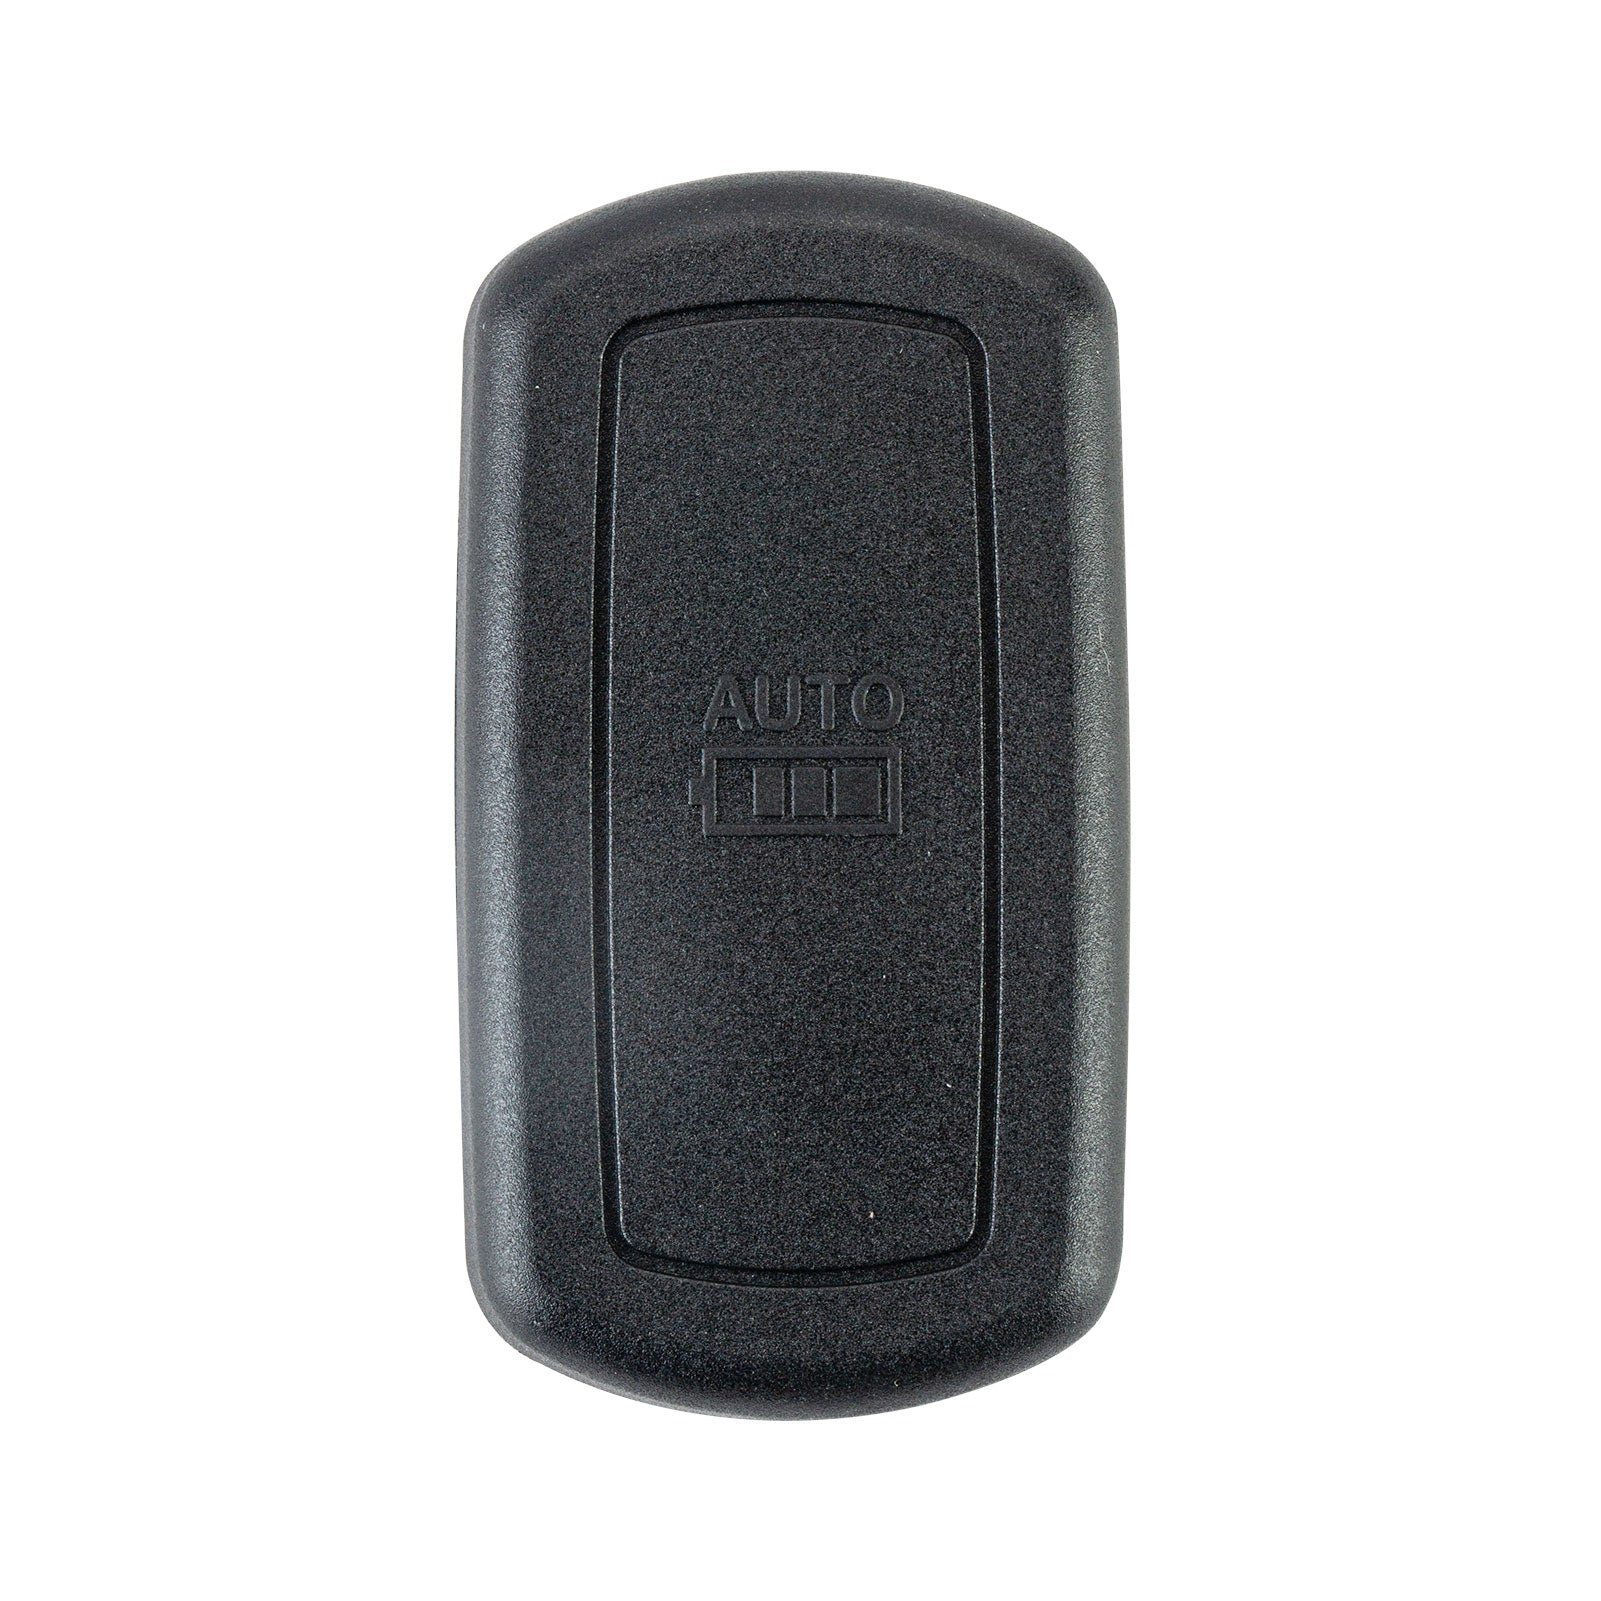 Extra-Partss Remote Car Key Fob Replacement for Land Rover NT8-15K6014CFFTXA fits 2005 2006 2007 2008 2009 LR3